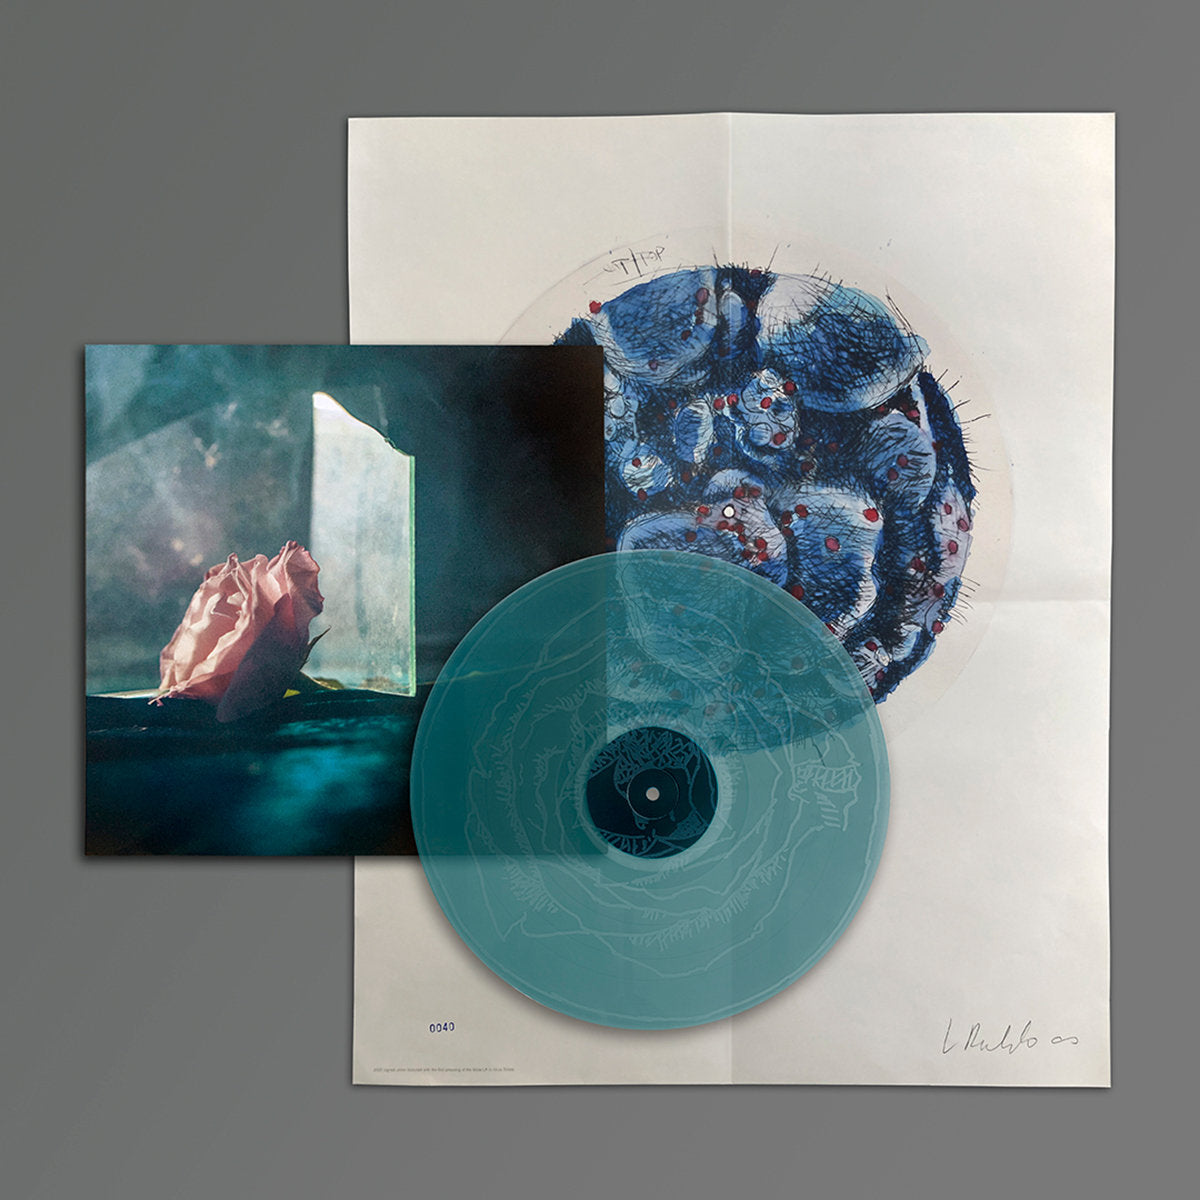 Lee Ranaldo - In Virus Times EP (Limited Edition on Turquoise Etched Vinyl + Signed Print)